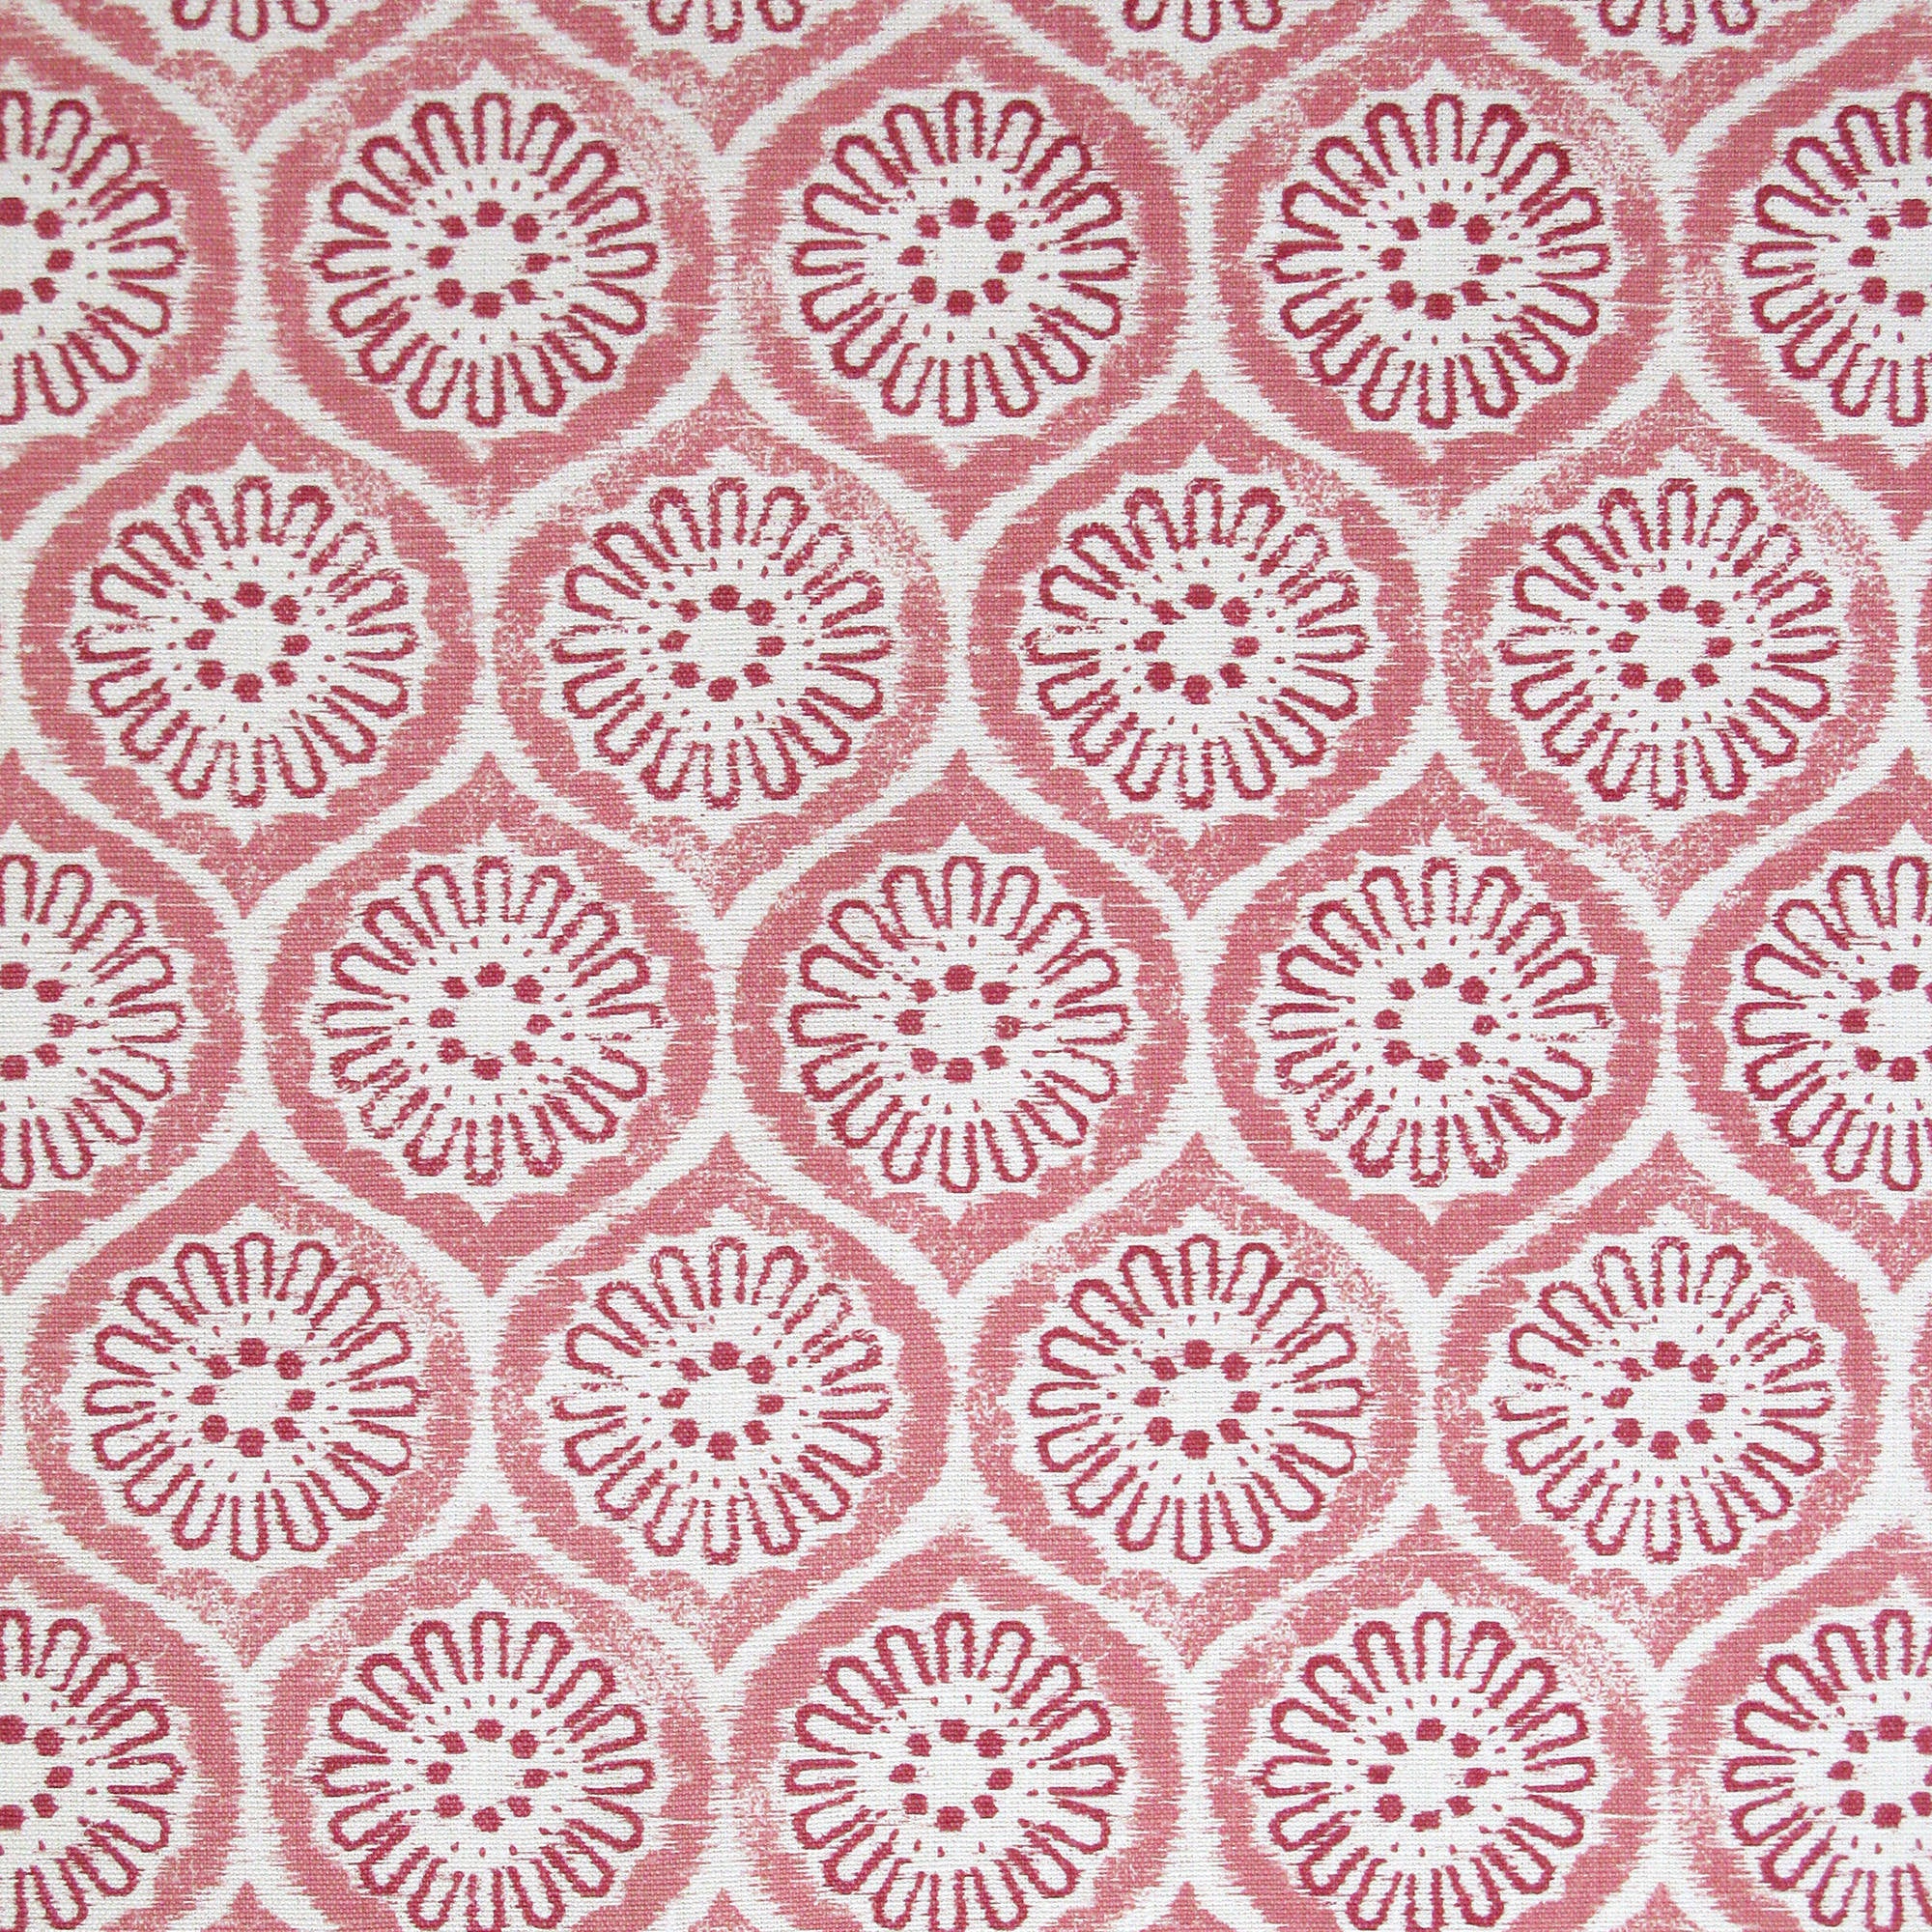 Detail of fabric in a floral lattice print in pink and red on a cream field.